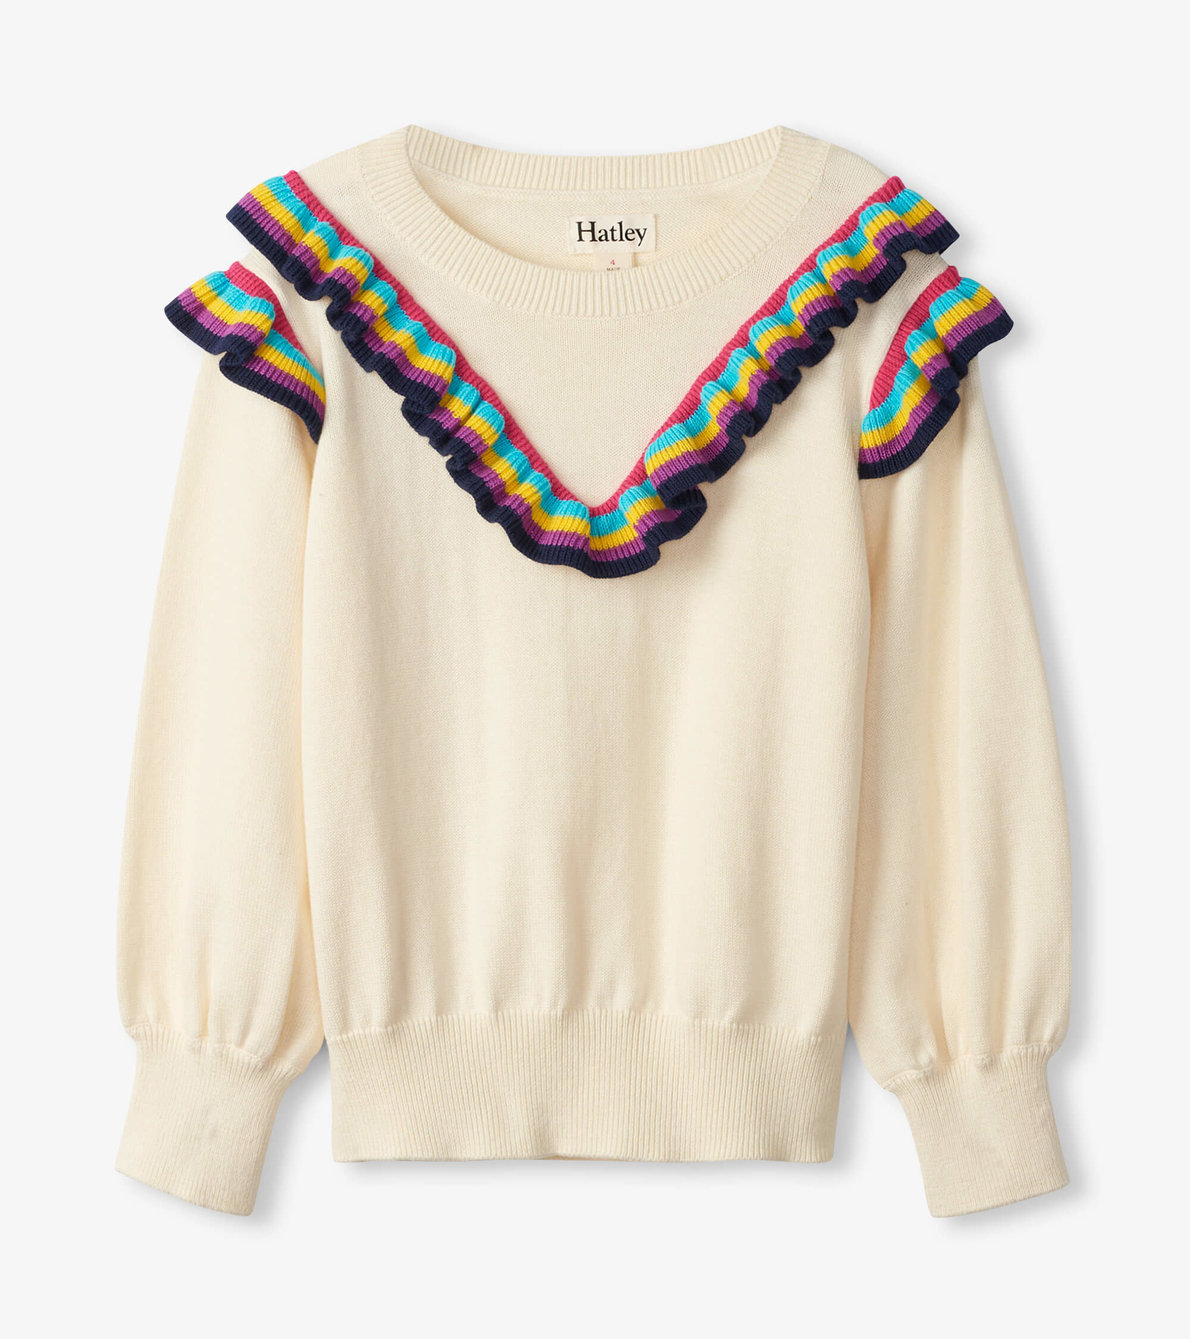 View larger image of Rainbow Ruffle Sweater